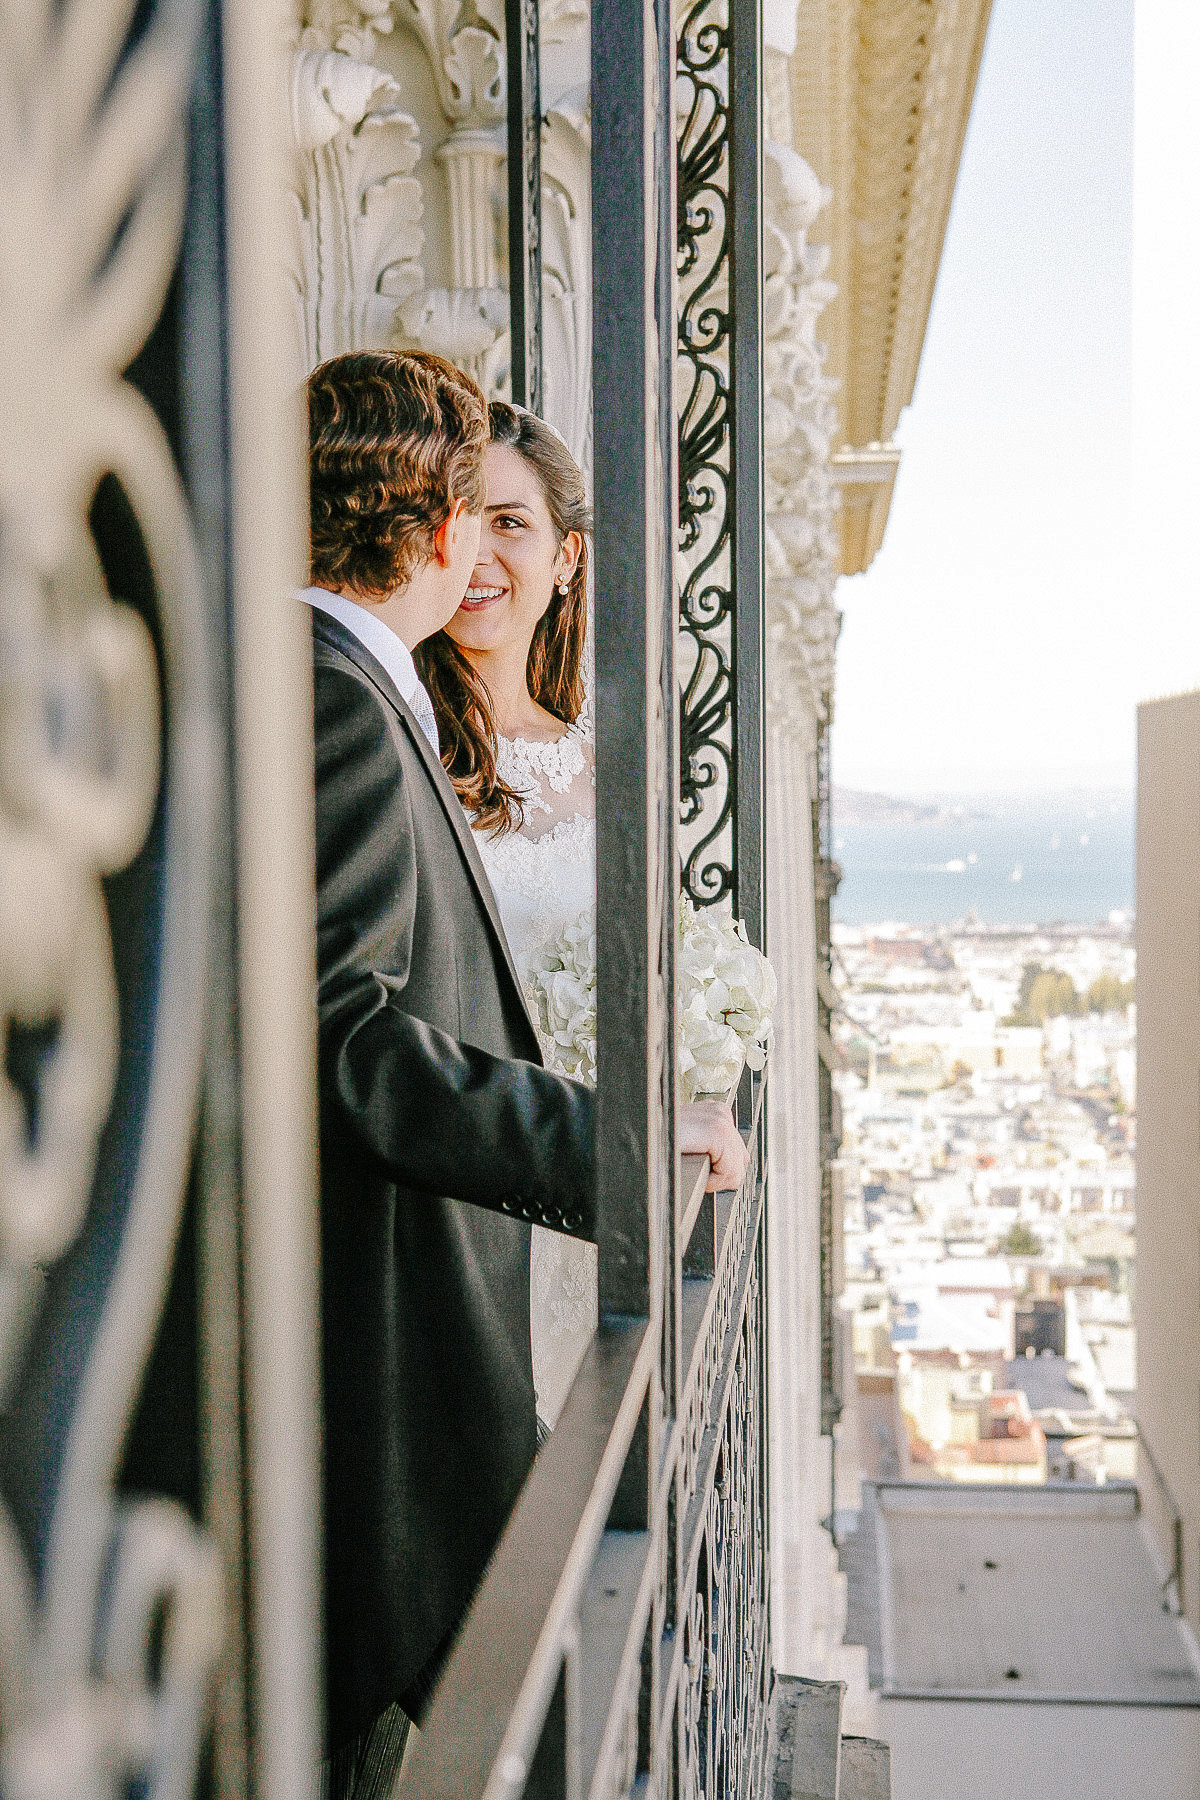 A couple at their wedding at the Fairmont Hotel in San Francisco.